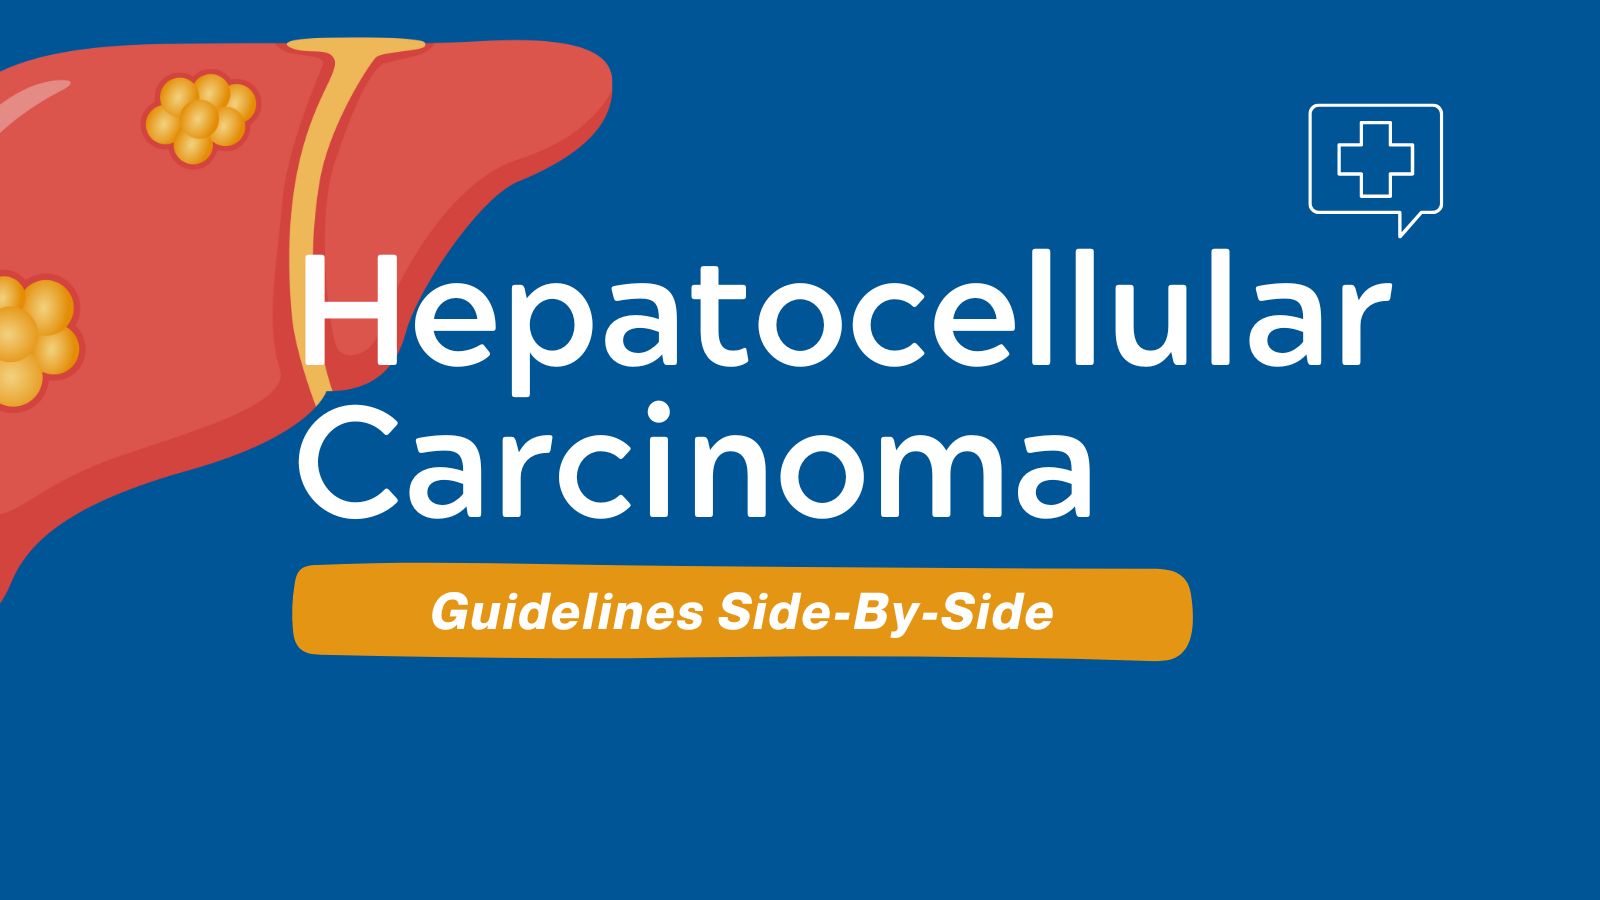 Guidelines Side-By-Side Hepatocellular Carcinoma